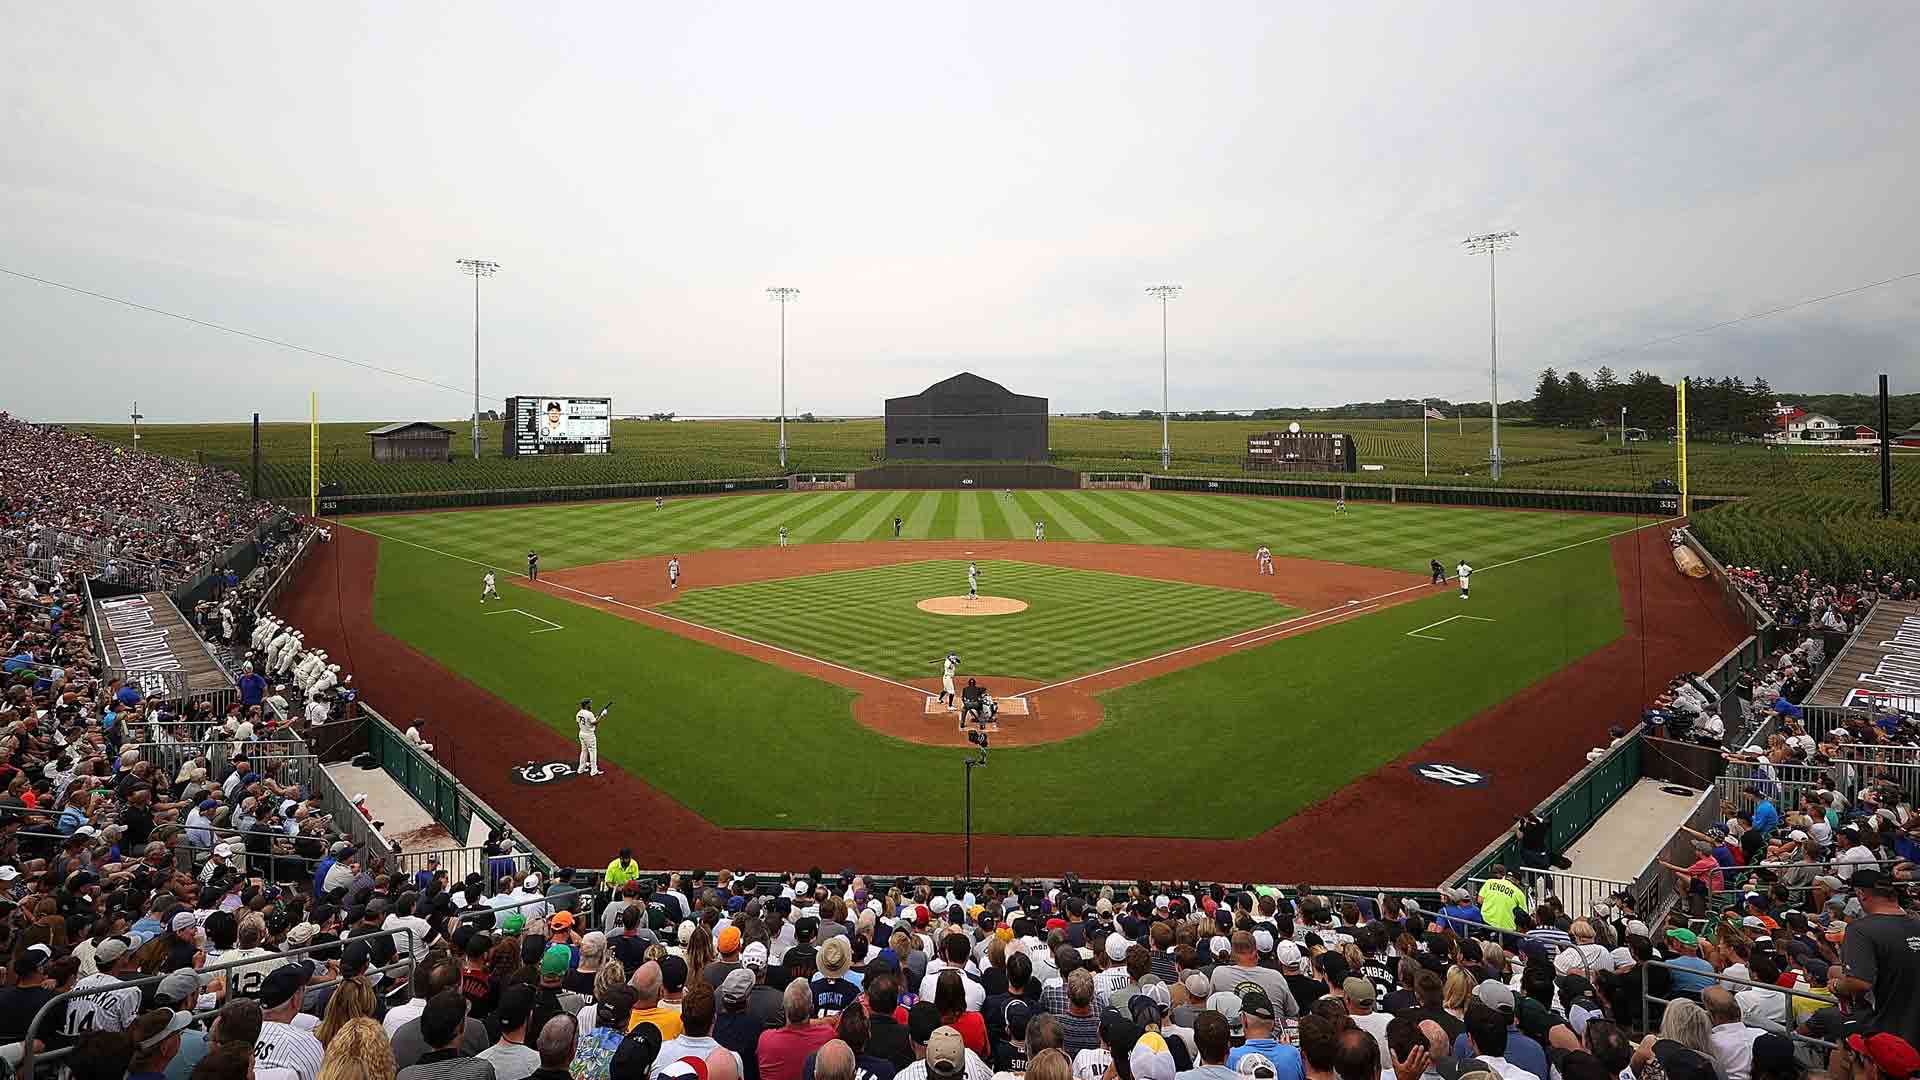 Is this heaven? No, it's Iowa:' Field of Dreams comes alive again